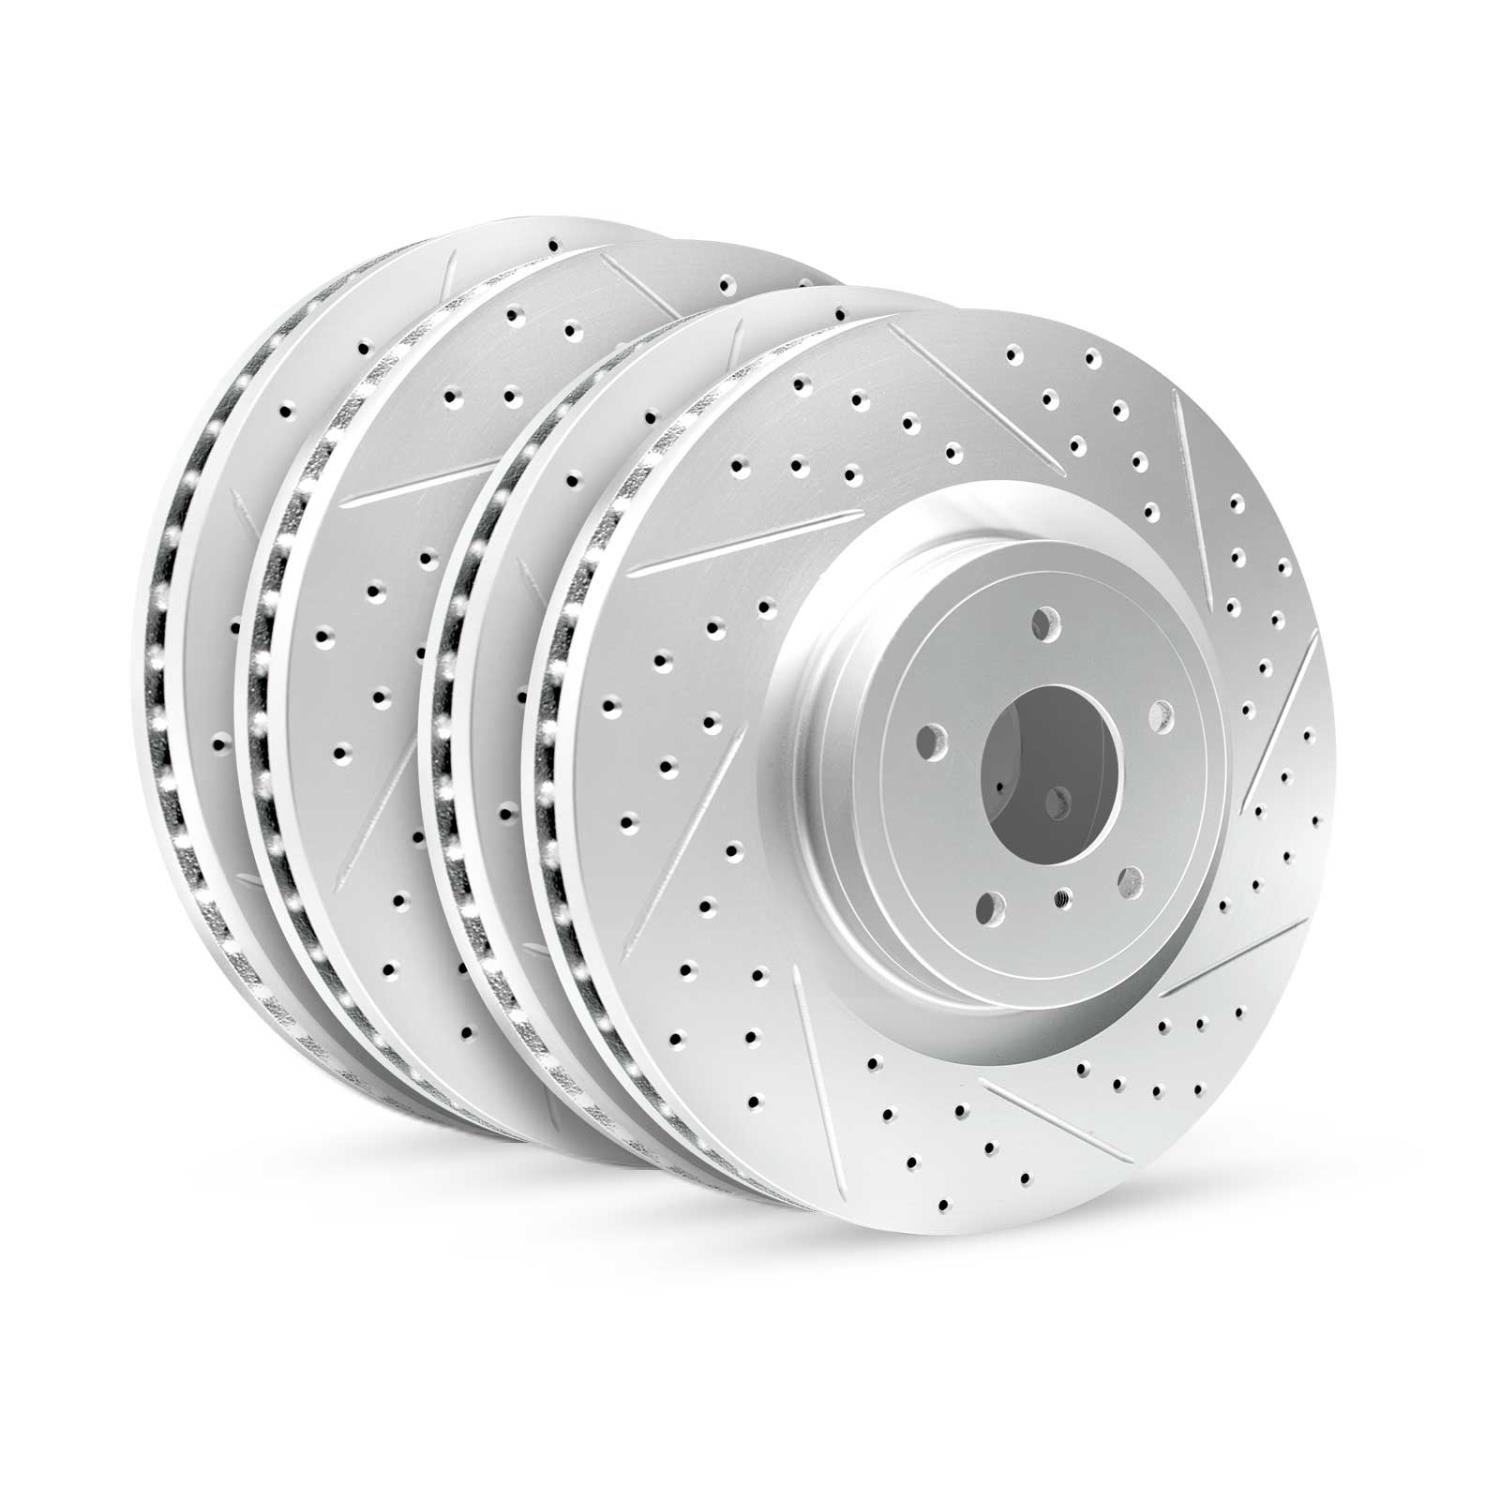 GEO-Carbon Drilled/Slotted Rotors, 2013-2019 Ford/Mazda,